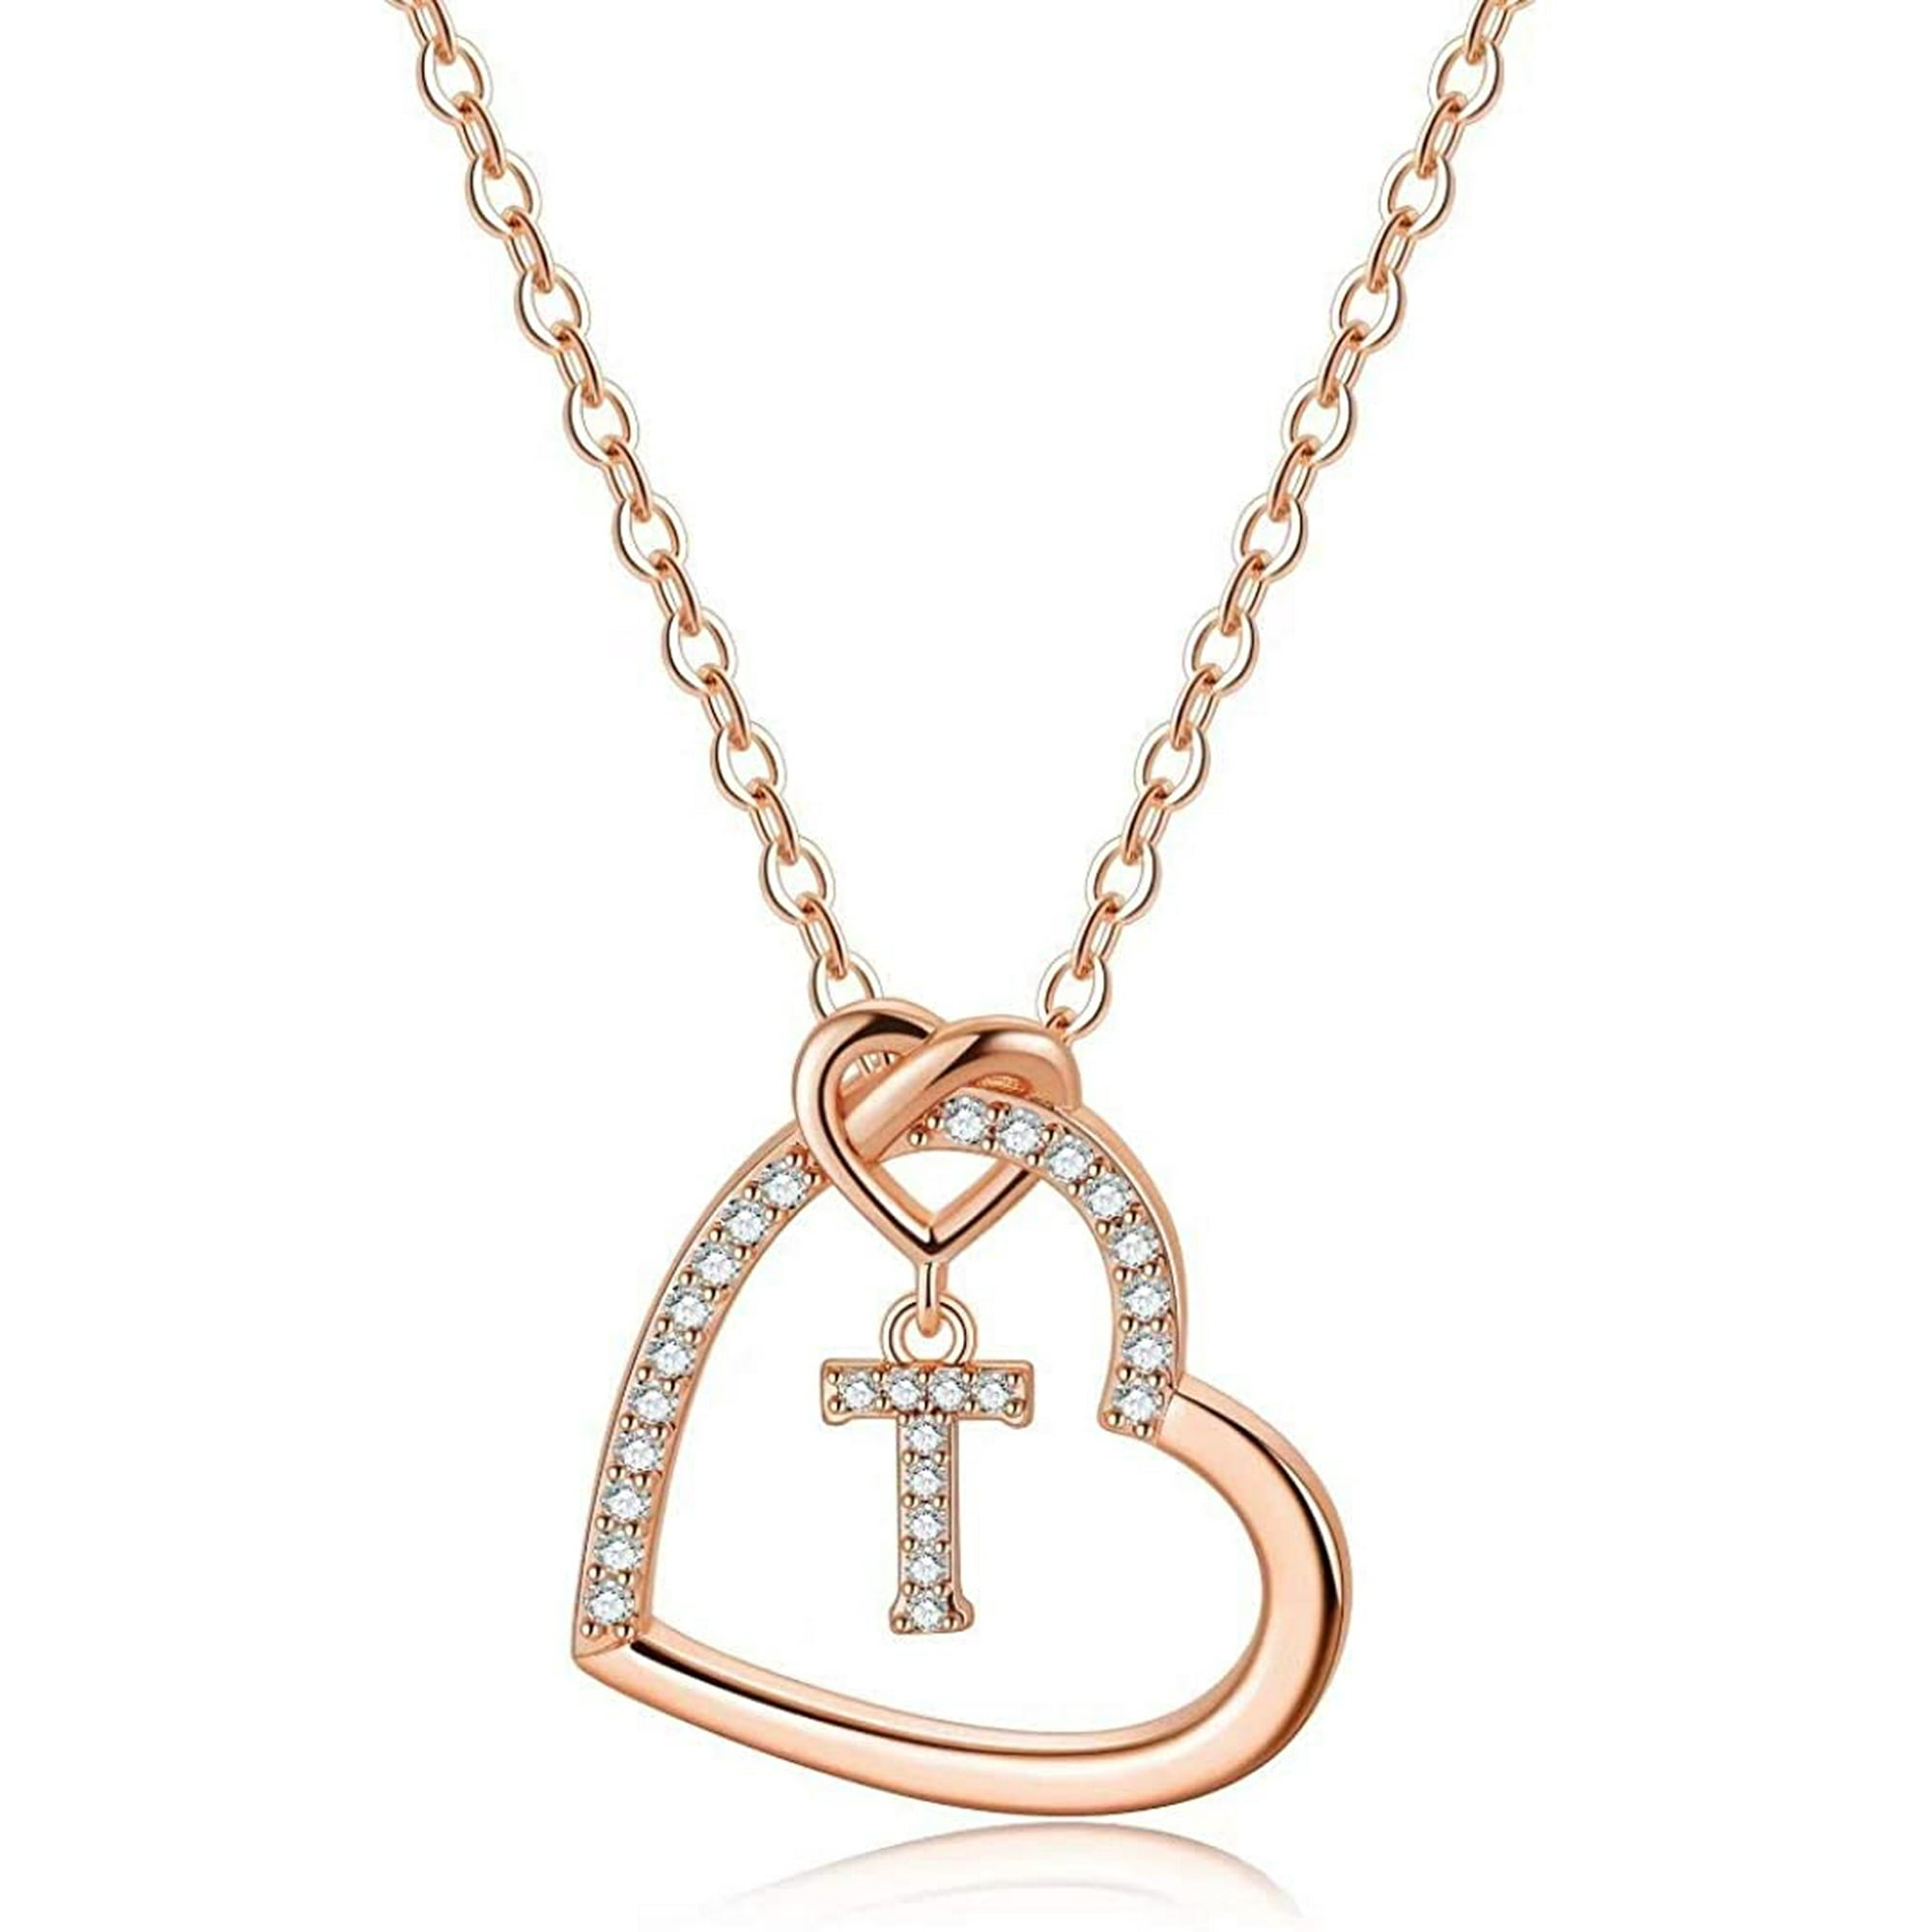 Yazi Heart Pendant Initial Necklaces, 14K Gold Filled Heart Initial  Necklaces for Teen Girls Women, Dainty Letter Necklace for Women Kids Girls  Jewelry Cute Heart Necklace Jewelry for Girls Gifts 